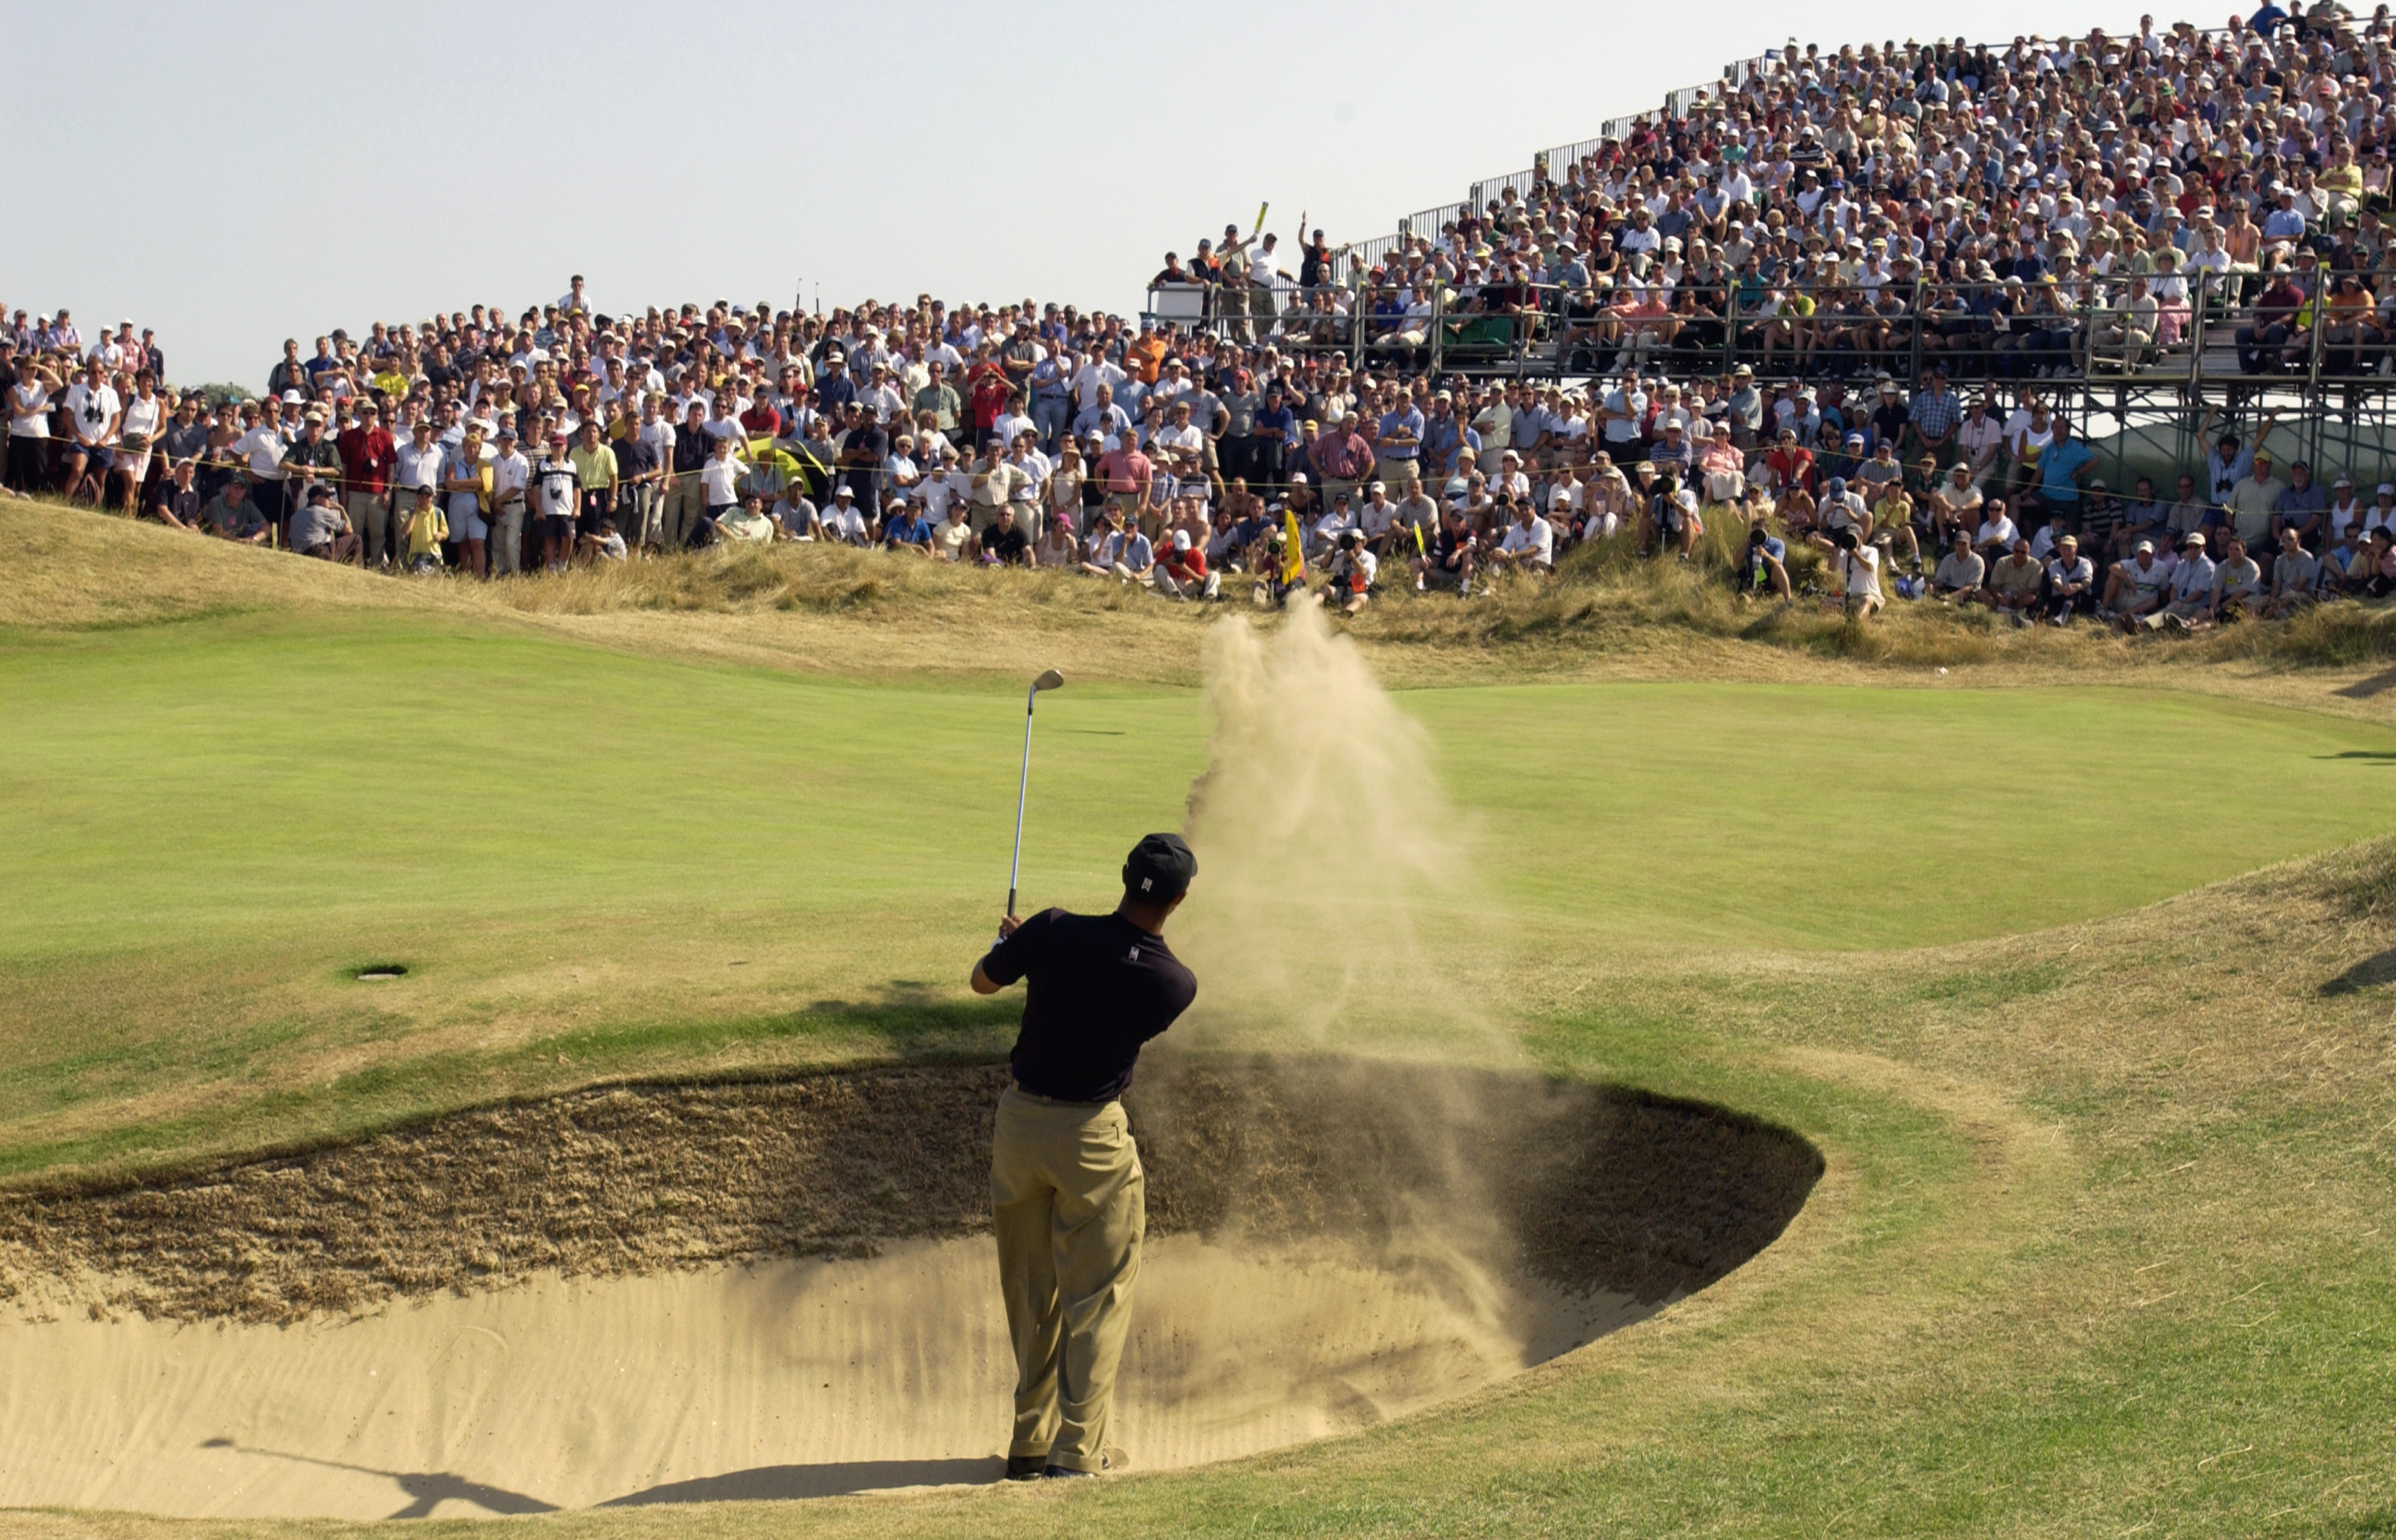 SANDWICH, ENGLAND - JULY 19: Tiger Woods of the USA plays out of the bunker on the sixth hole during the third round of The Open Championship on July 19, 2003 at the Royal St George's course in Sandwich, England. (Photo by Harry How/Getty Images)